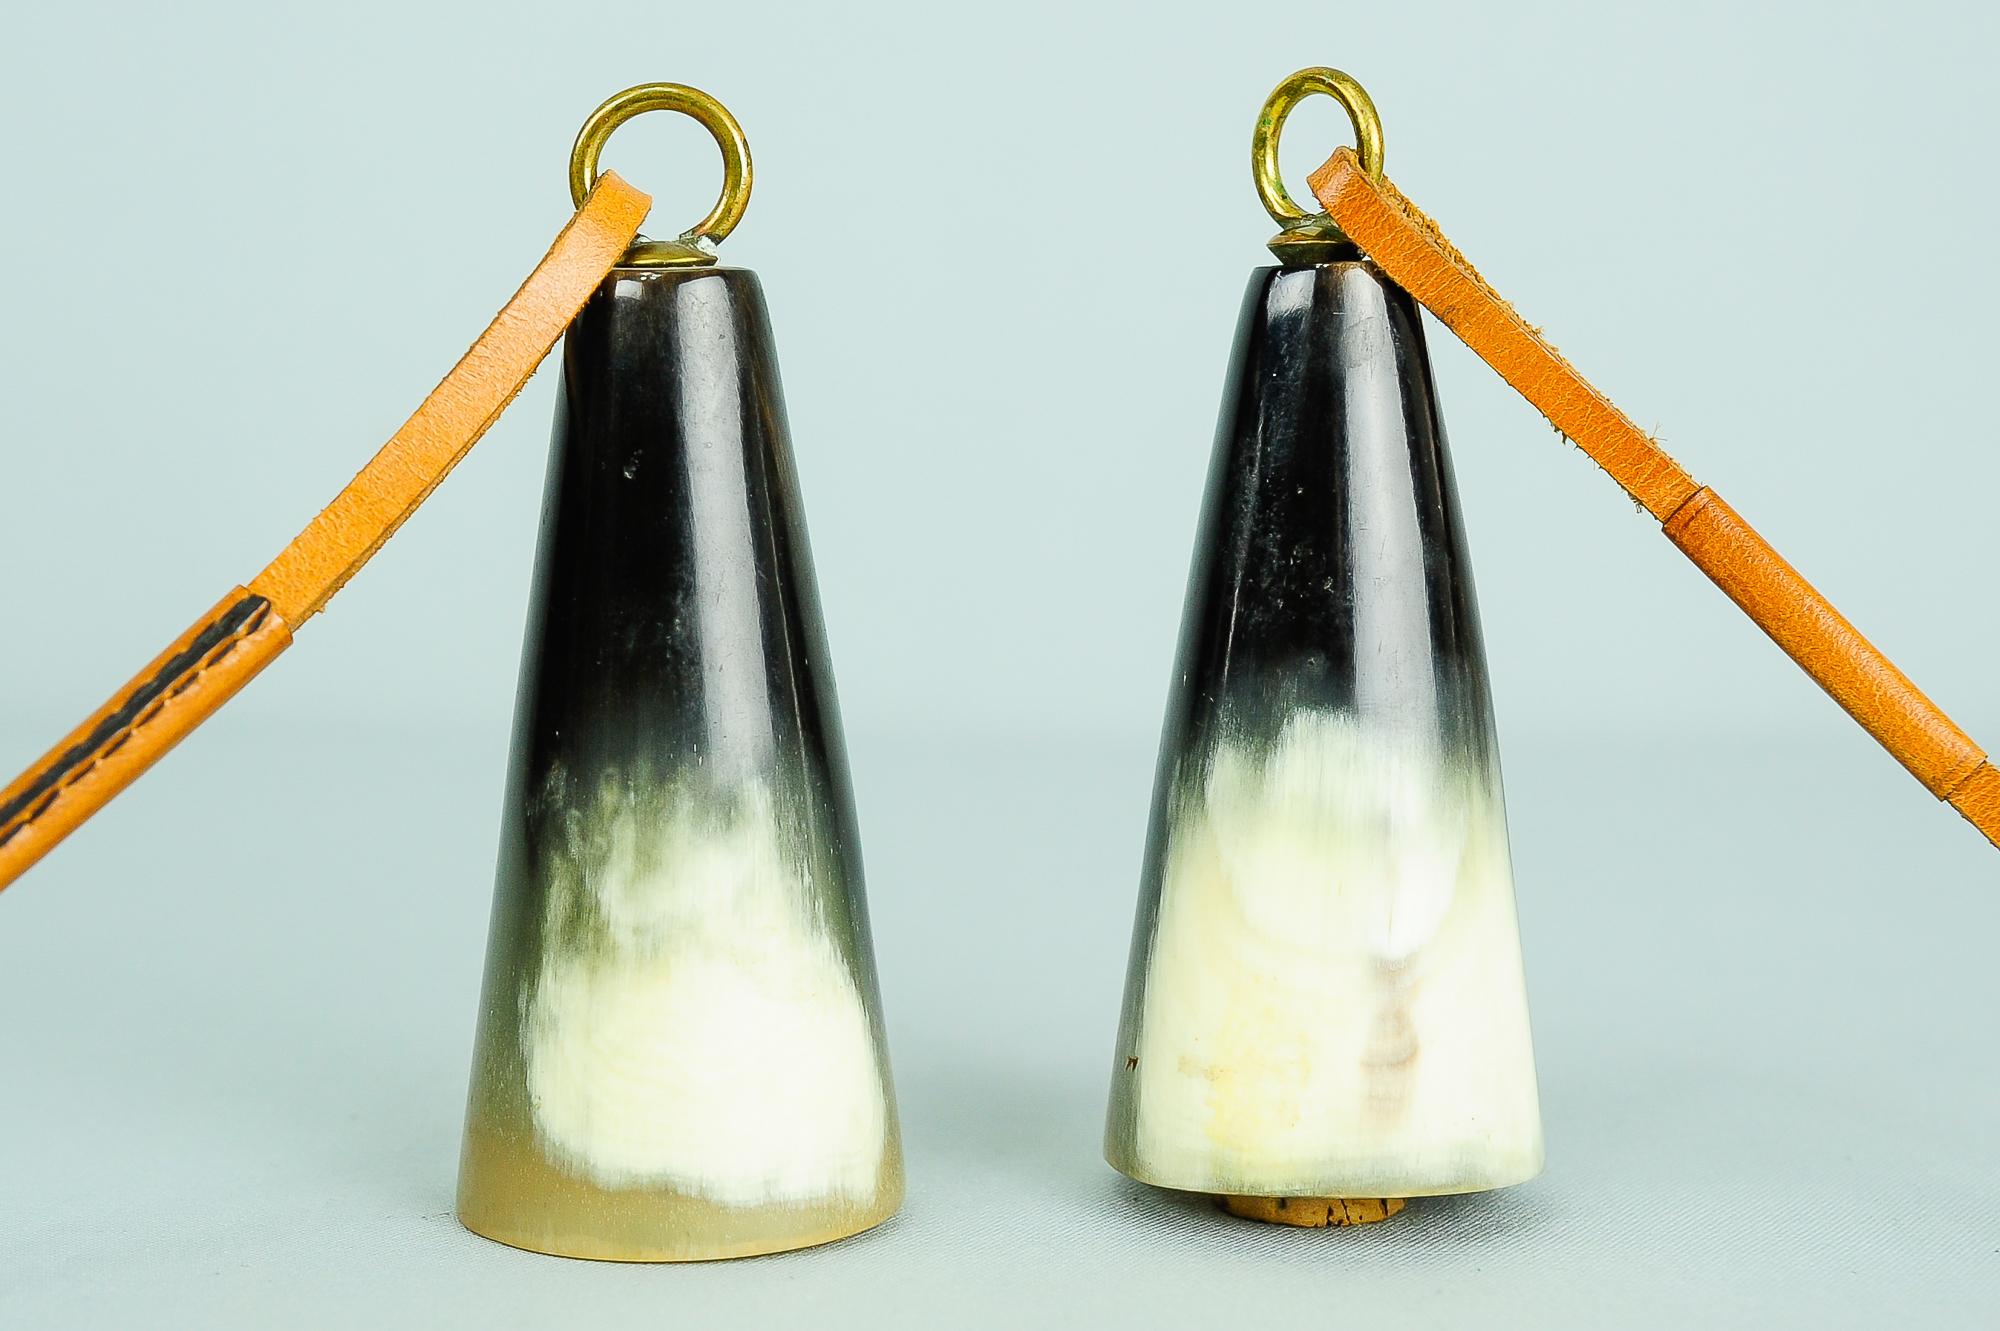 Carl Auböck bottle stopper, Horn, Leather, Austria, 1950s
Original condition
Price is for both together.